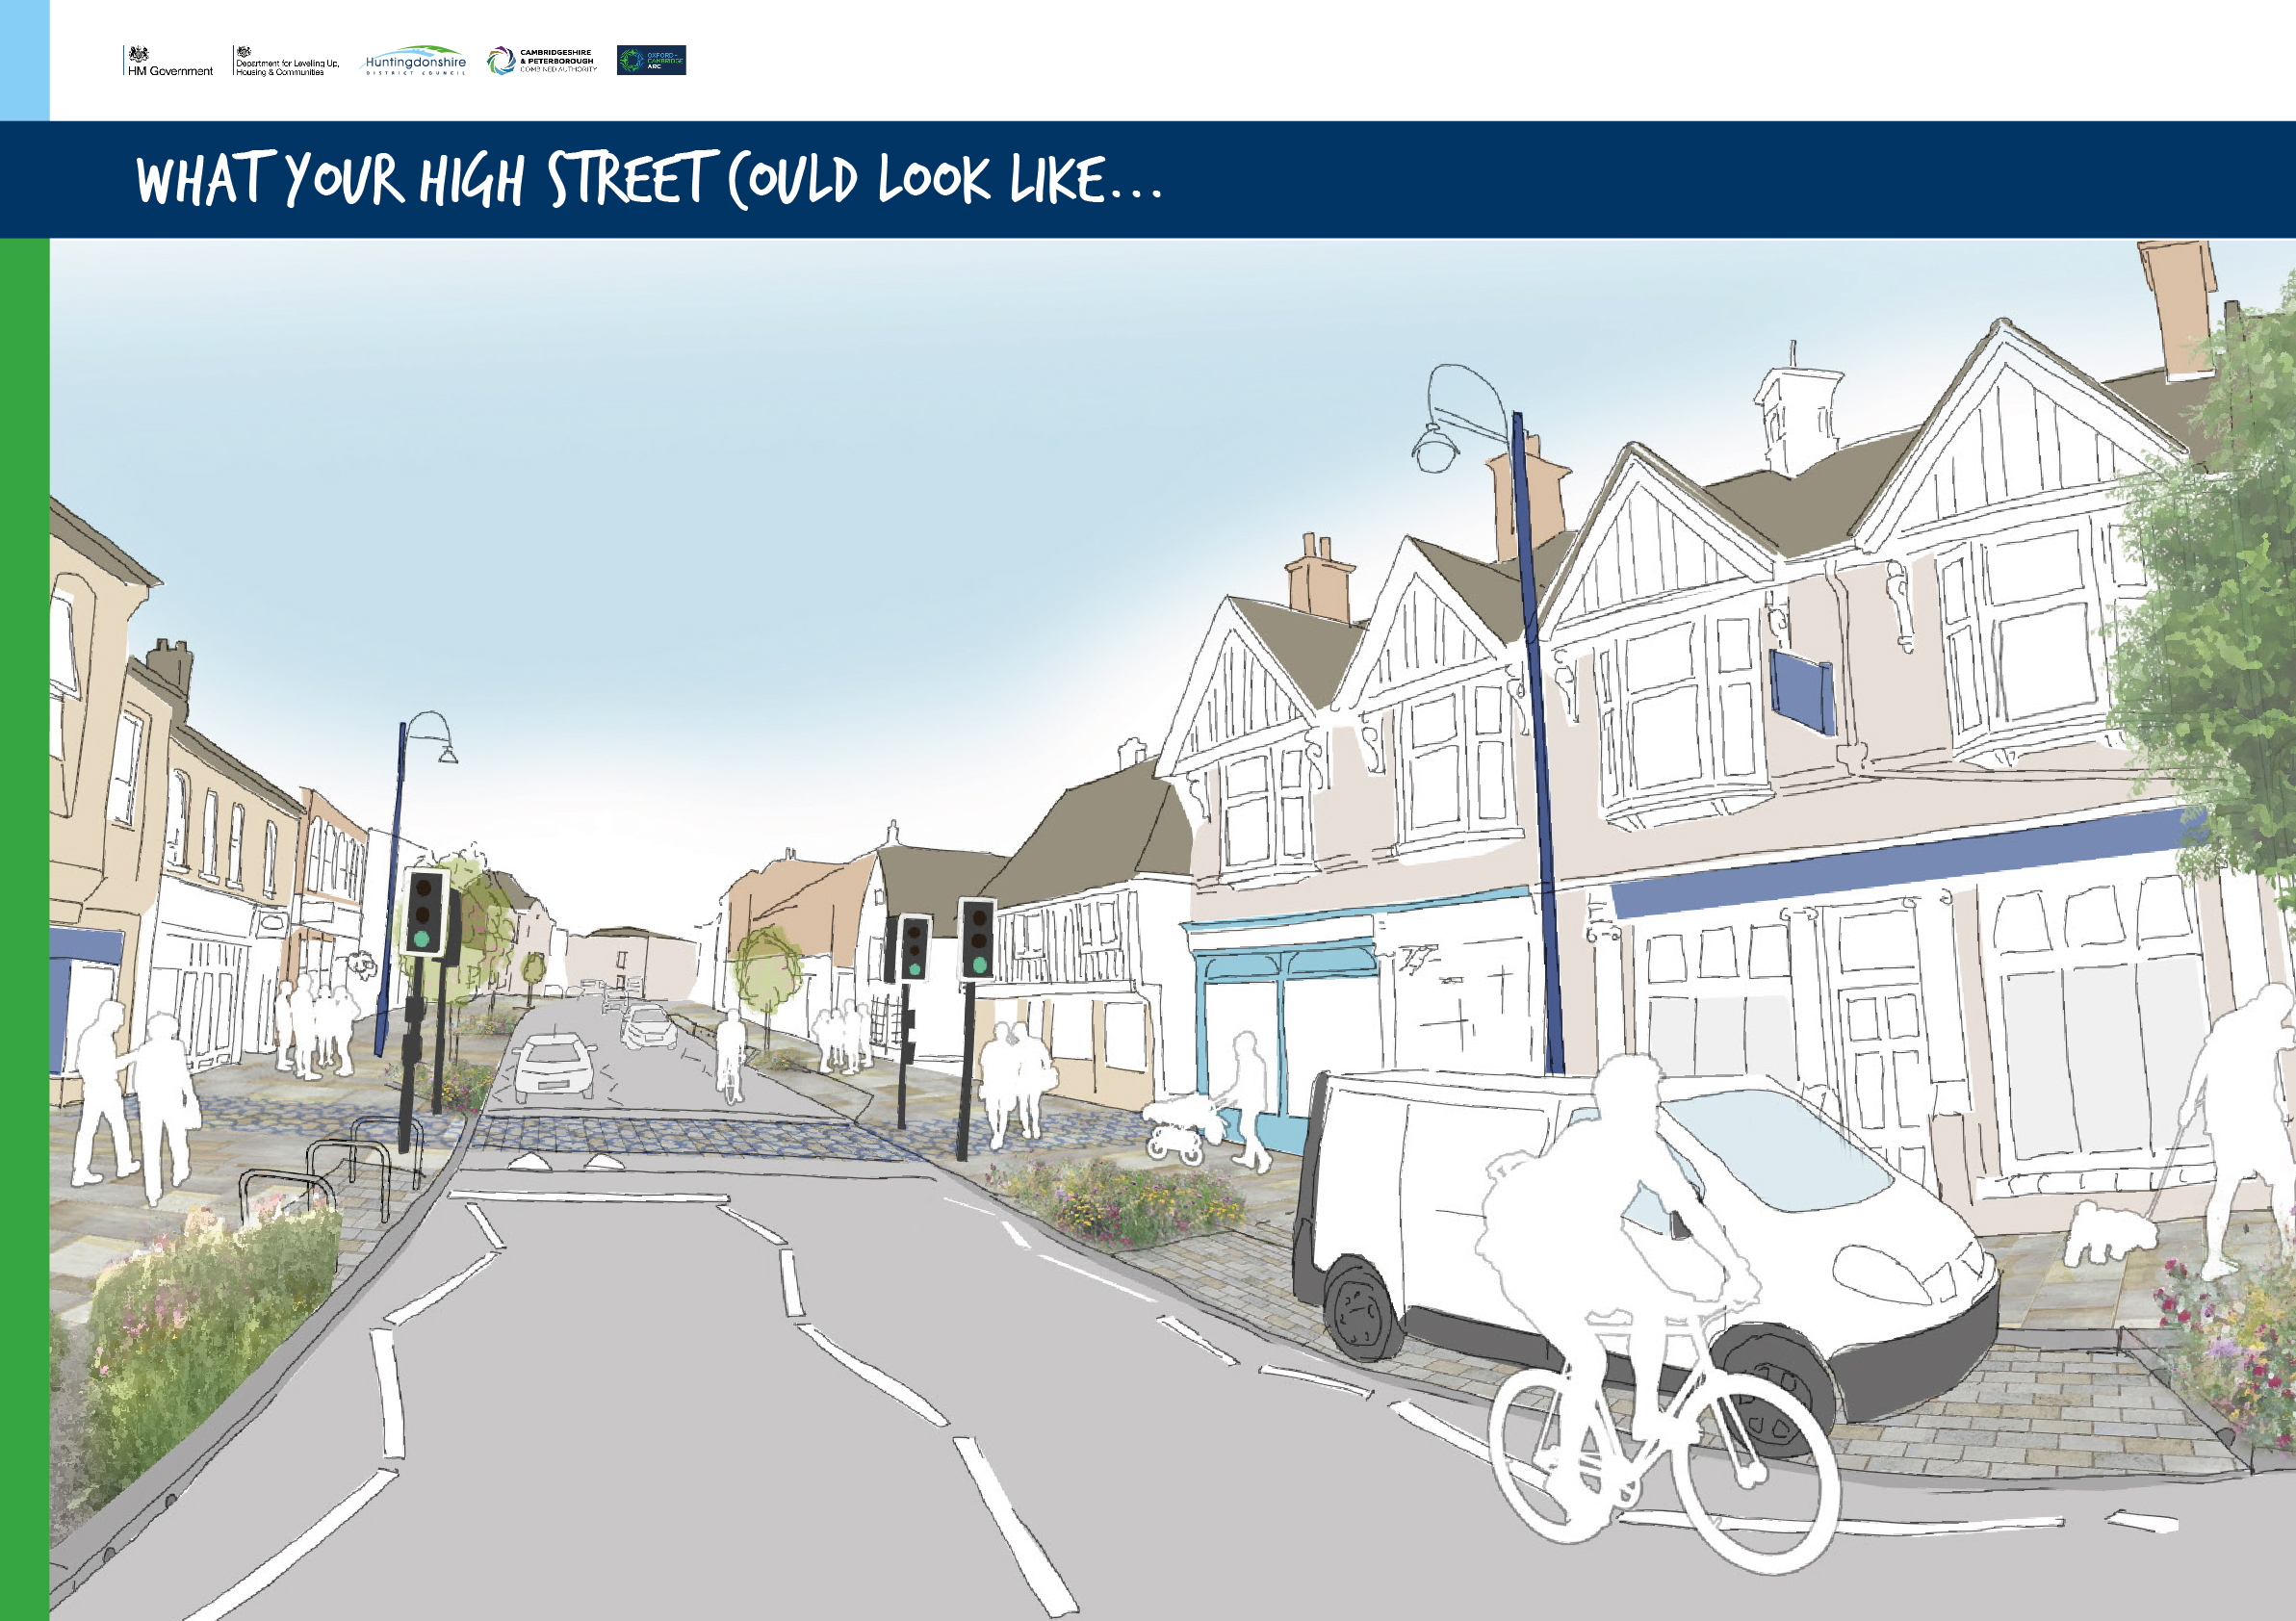 What your high street could look like. Image containing a drawing of the street